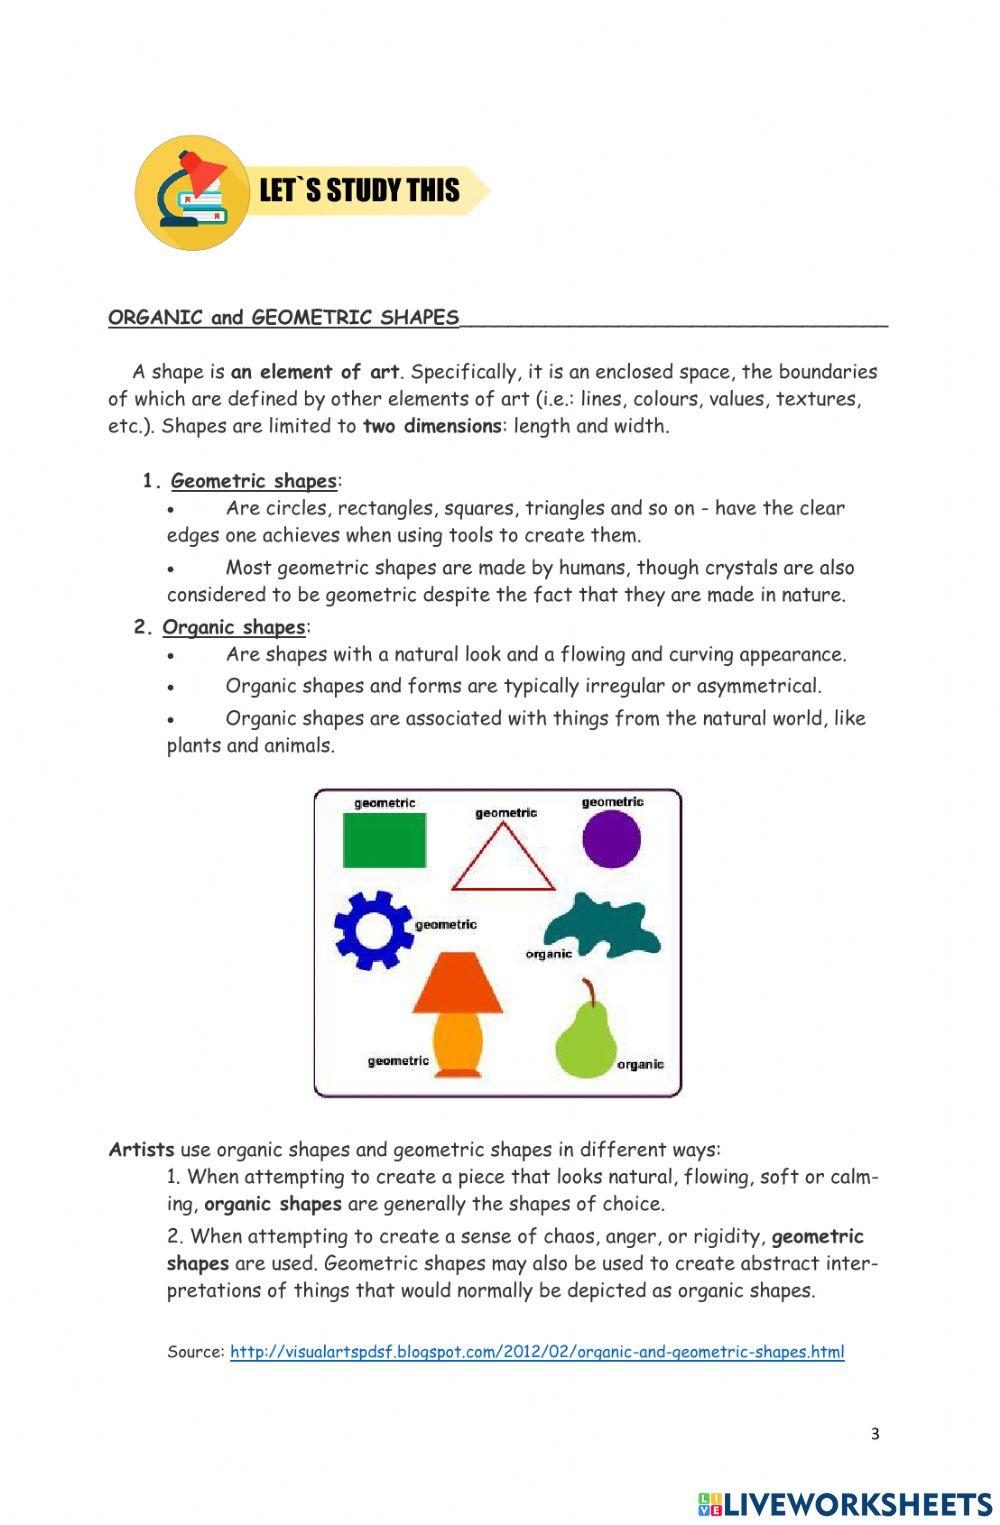 Q3W5-Lesson 18 - Fun with Shapes - ACTIVITIES-ODL